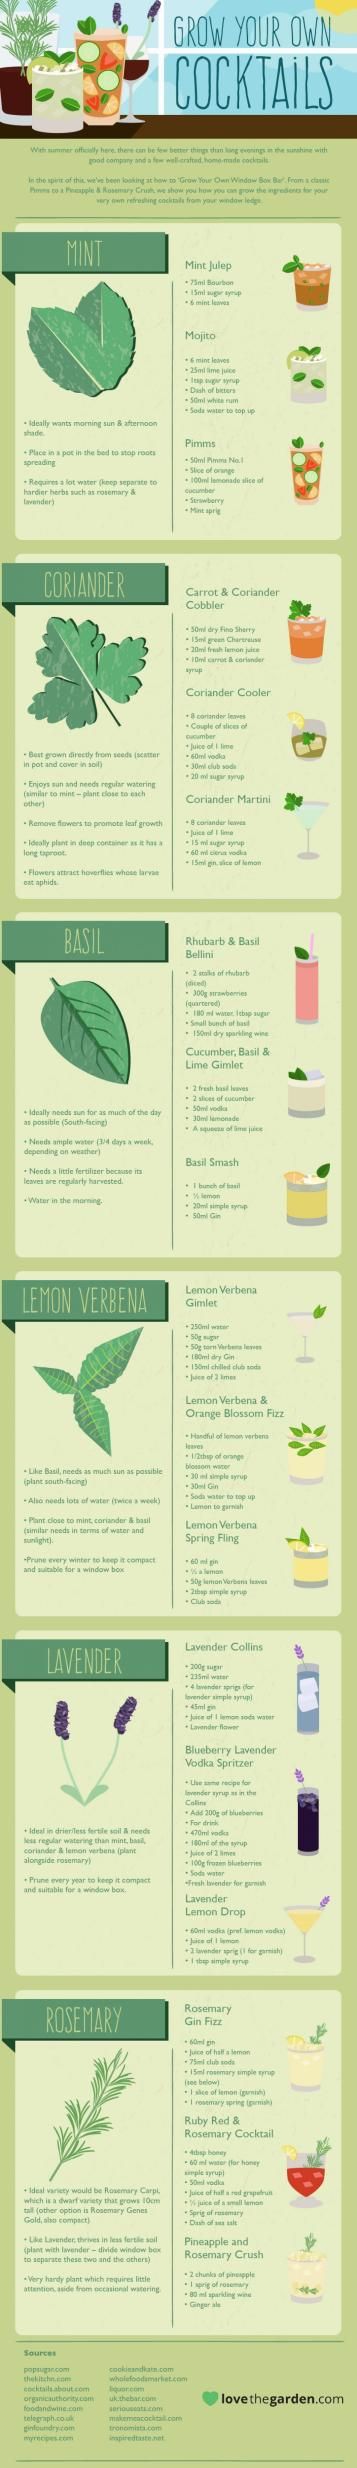 How to grow your own cocktails infographic